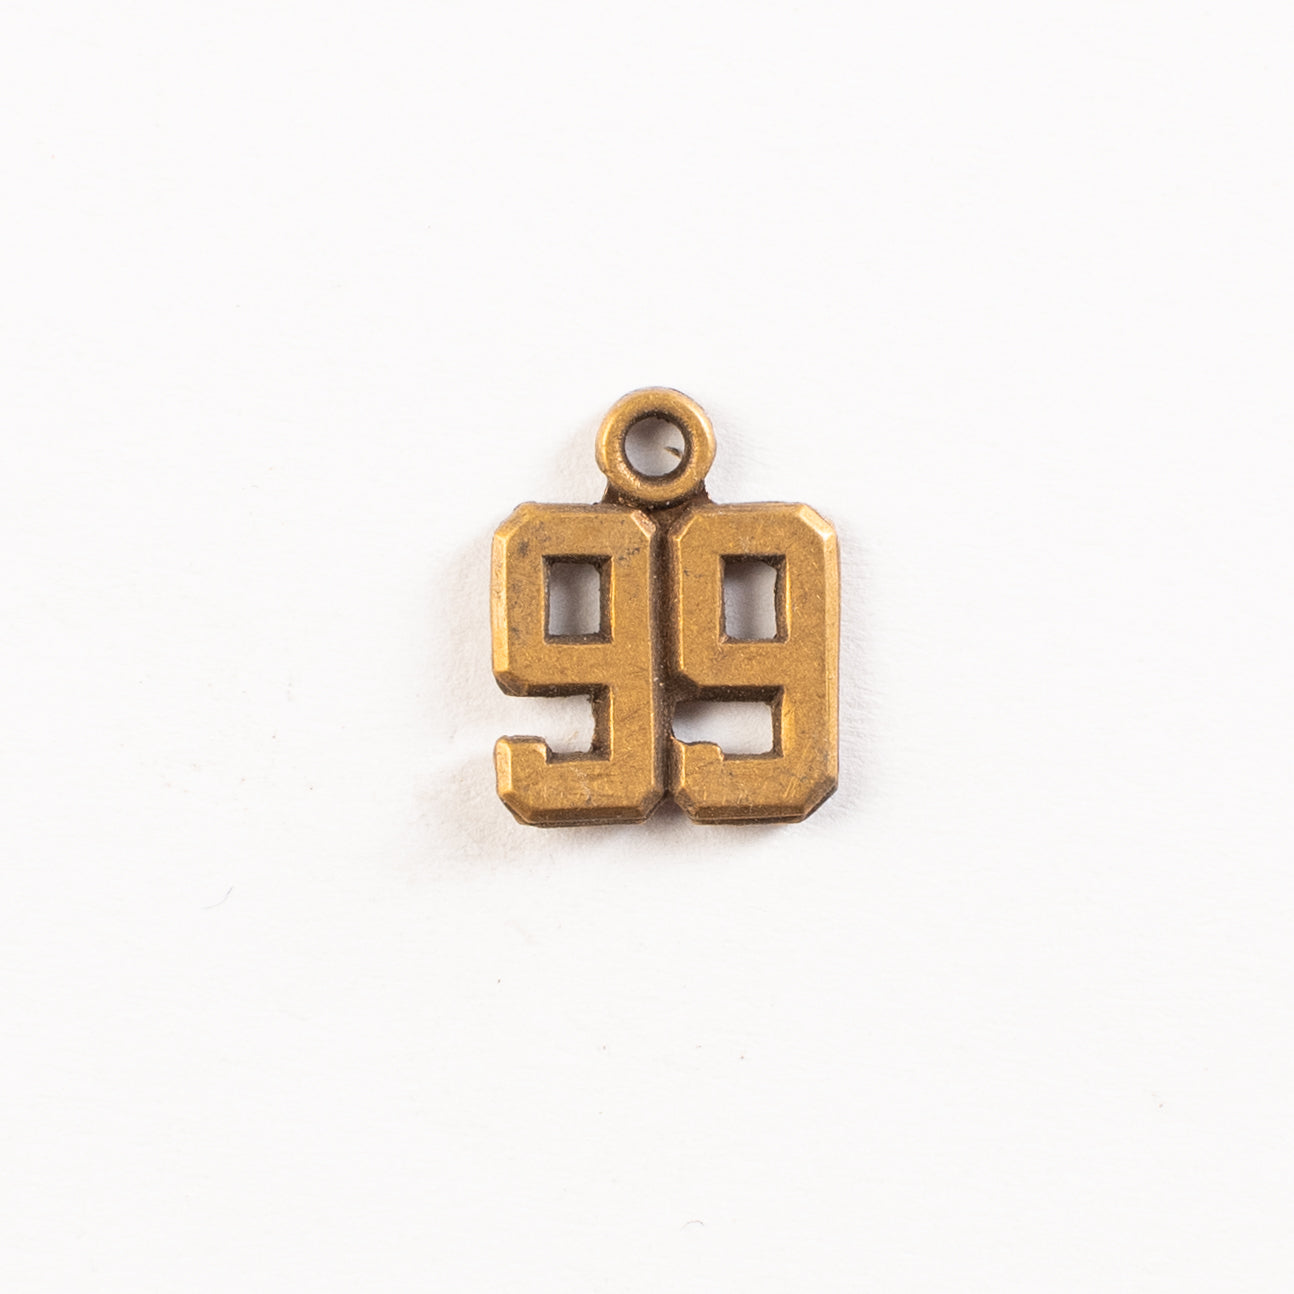 11mm 99 Charm, Antique Gold, Classic Silver, pack of 6.